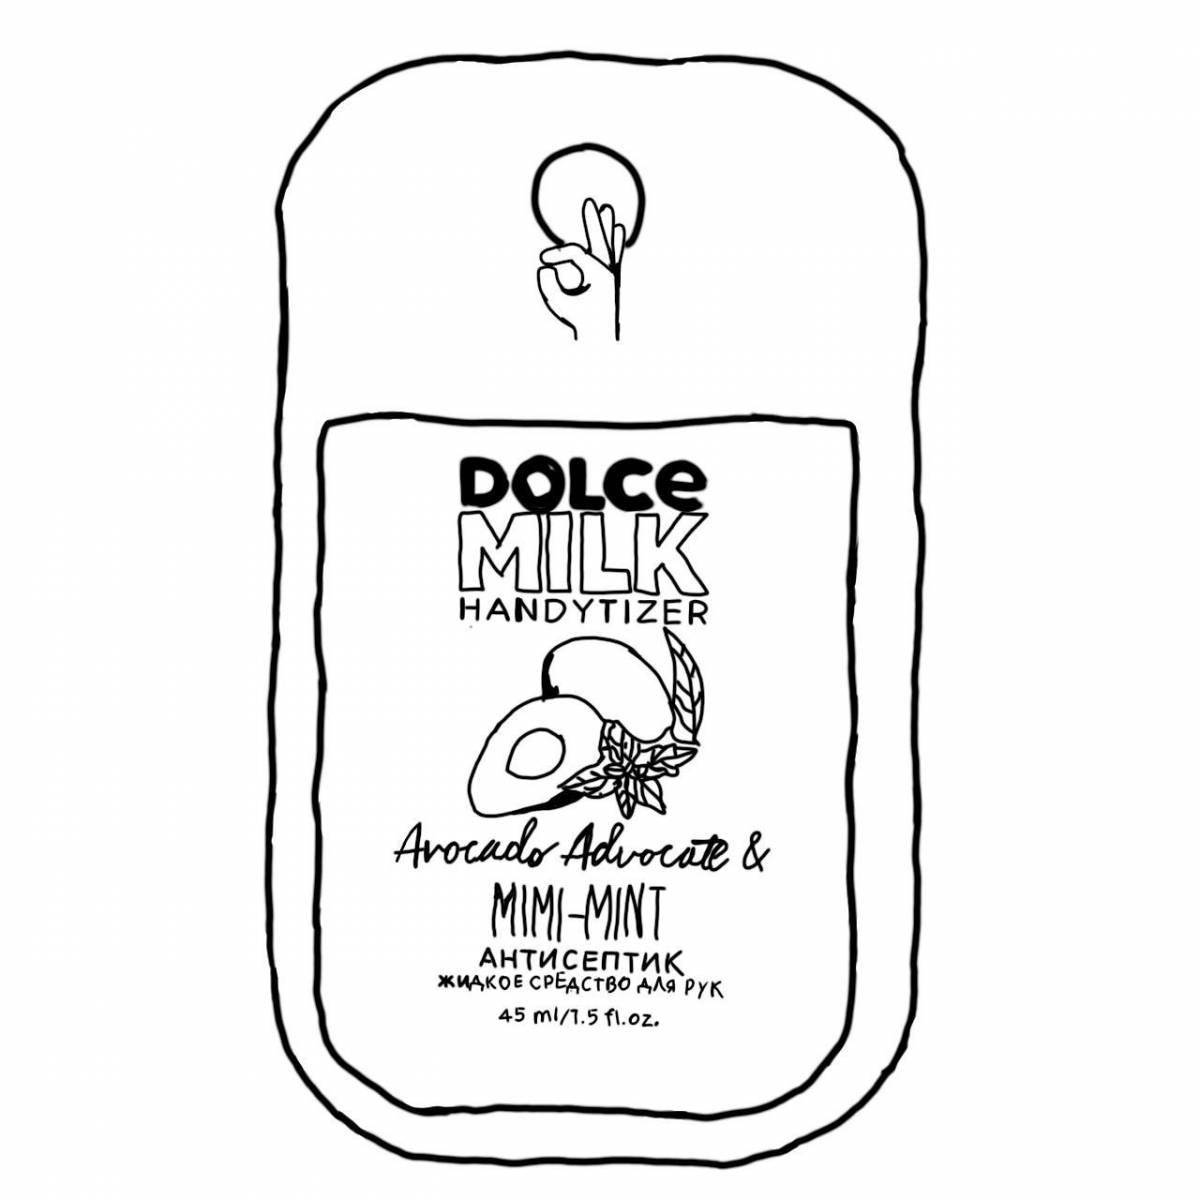 Dolce milk cosmetics for girls #15